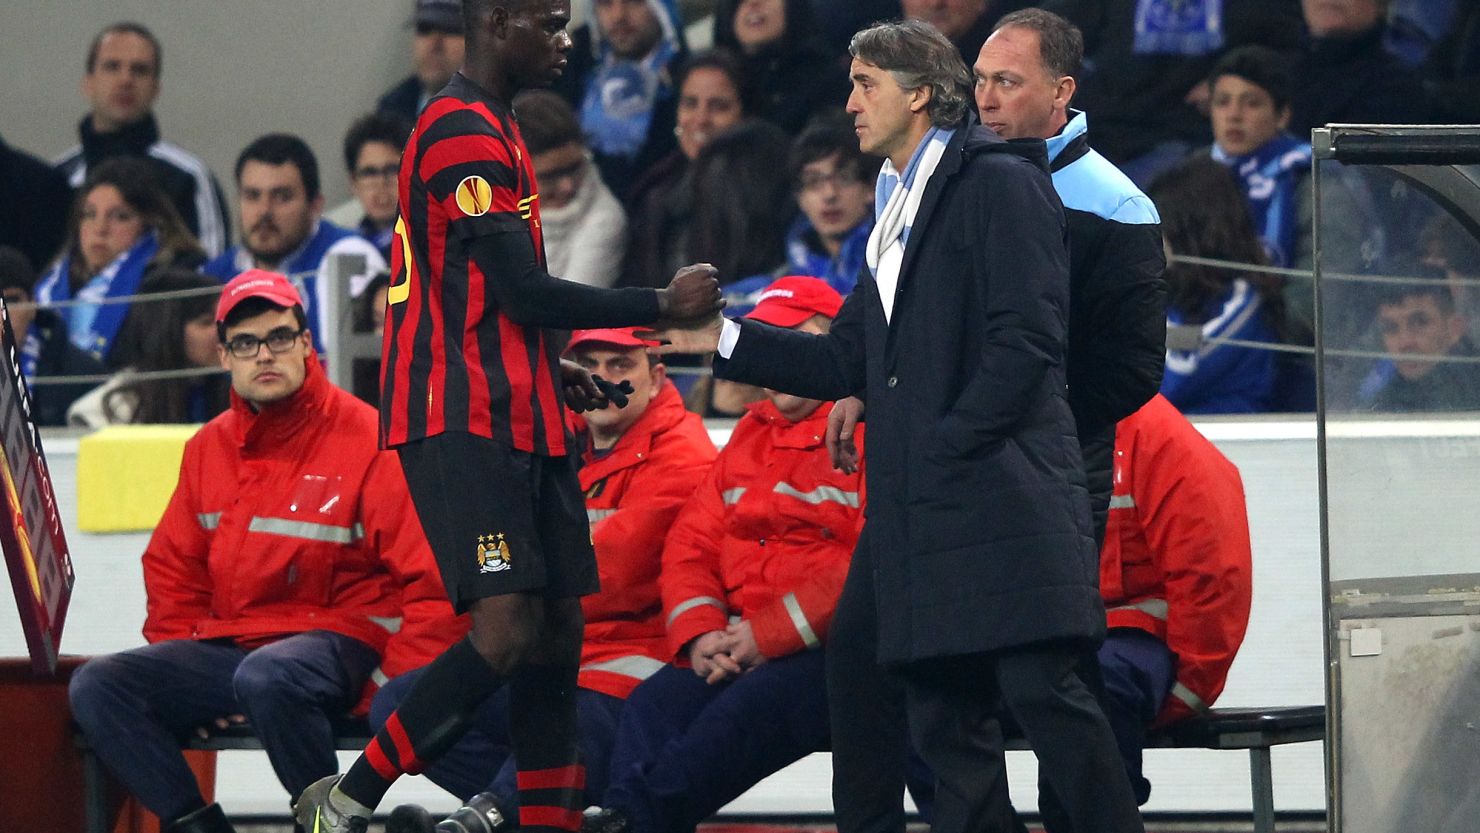 Mario Balotelli shakes hands with manager Roberto Mancini after being substituted in the Europa League tie at Porto.